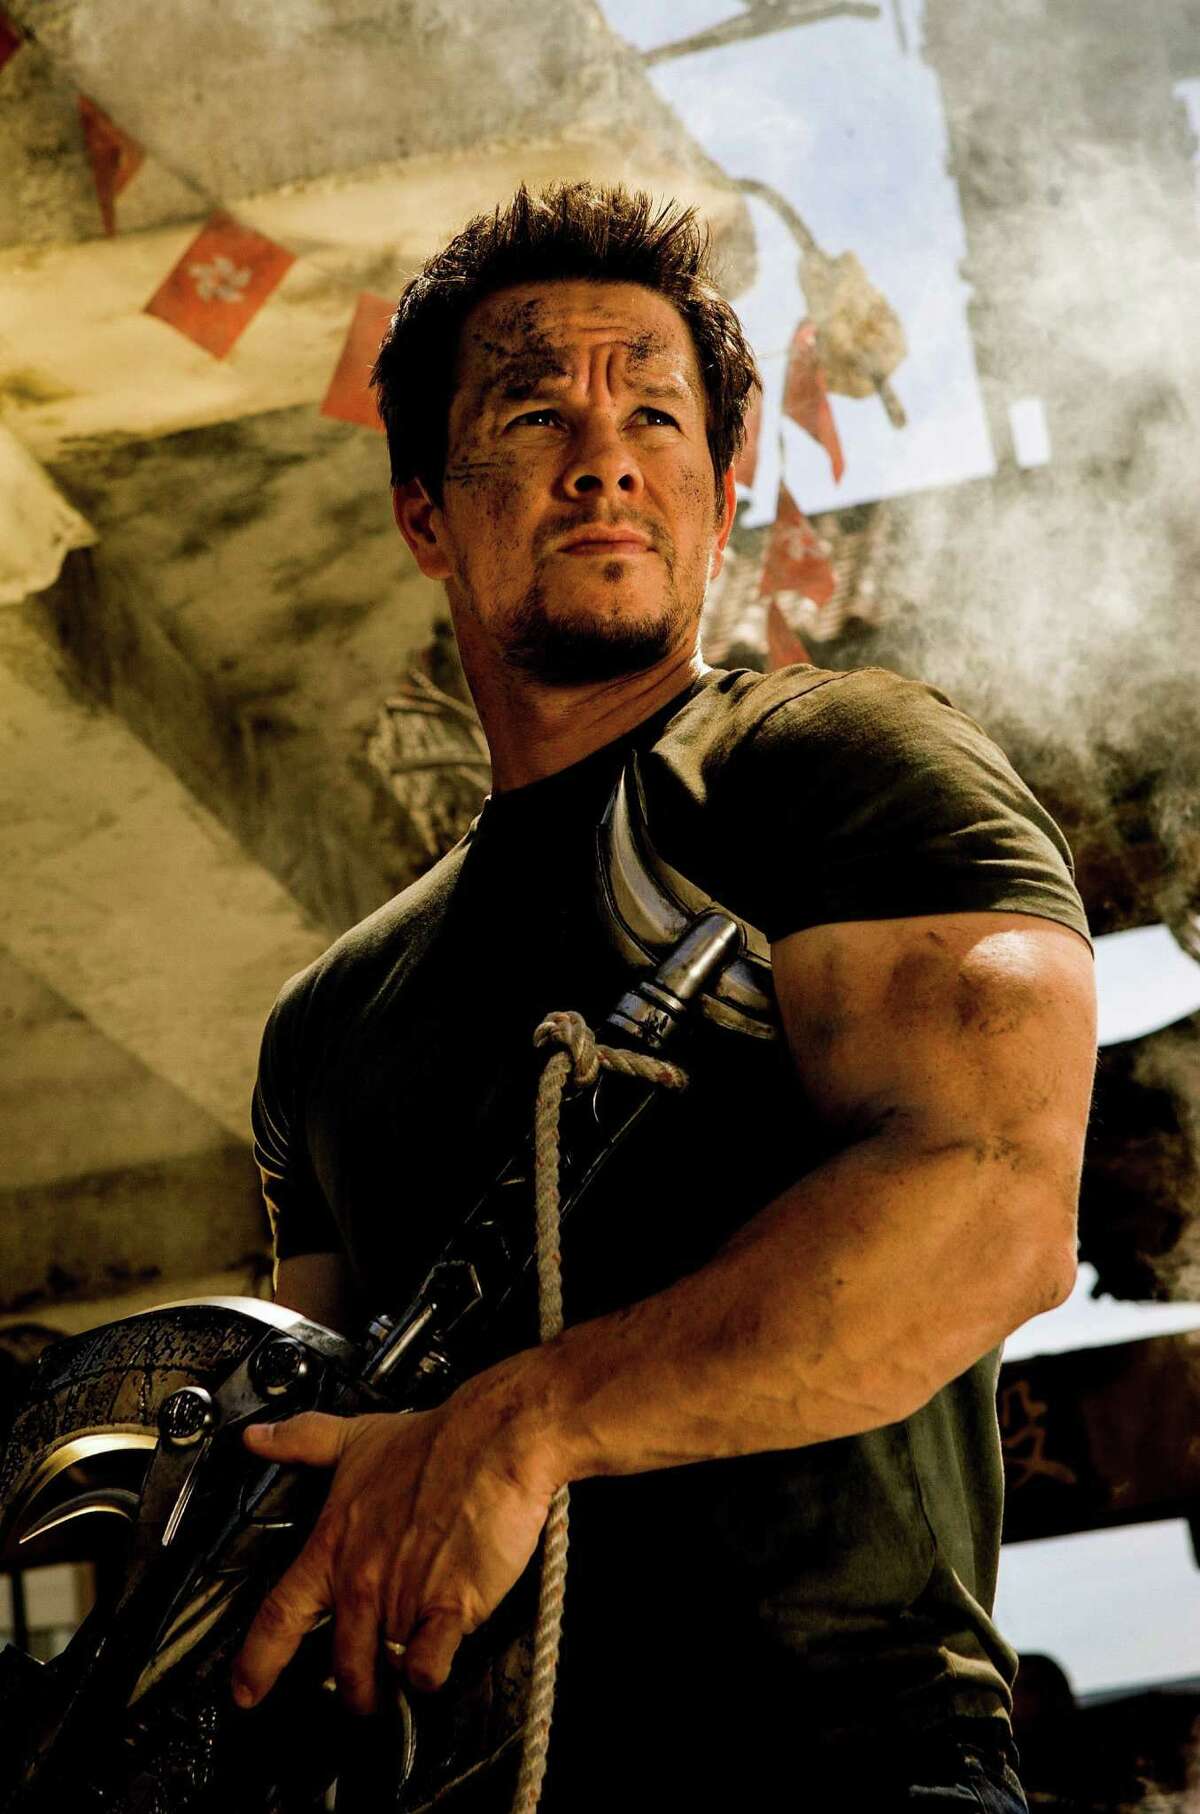 Mark Wahlberg plays Cade Yeager in "Transformers: Age of Extinction," from Paramount Pictures. (MCT)